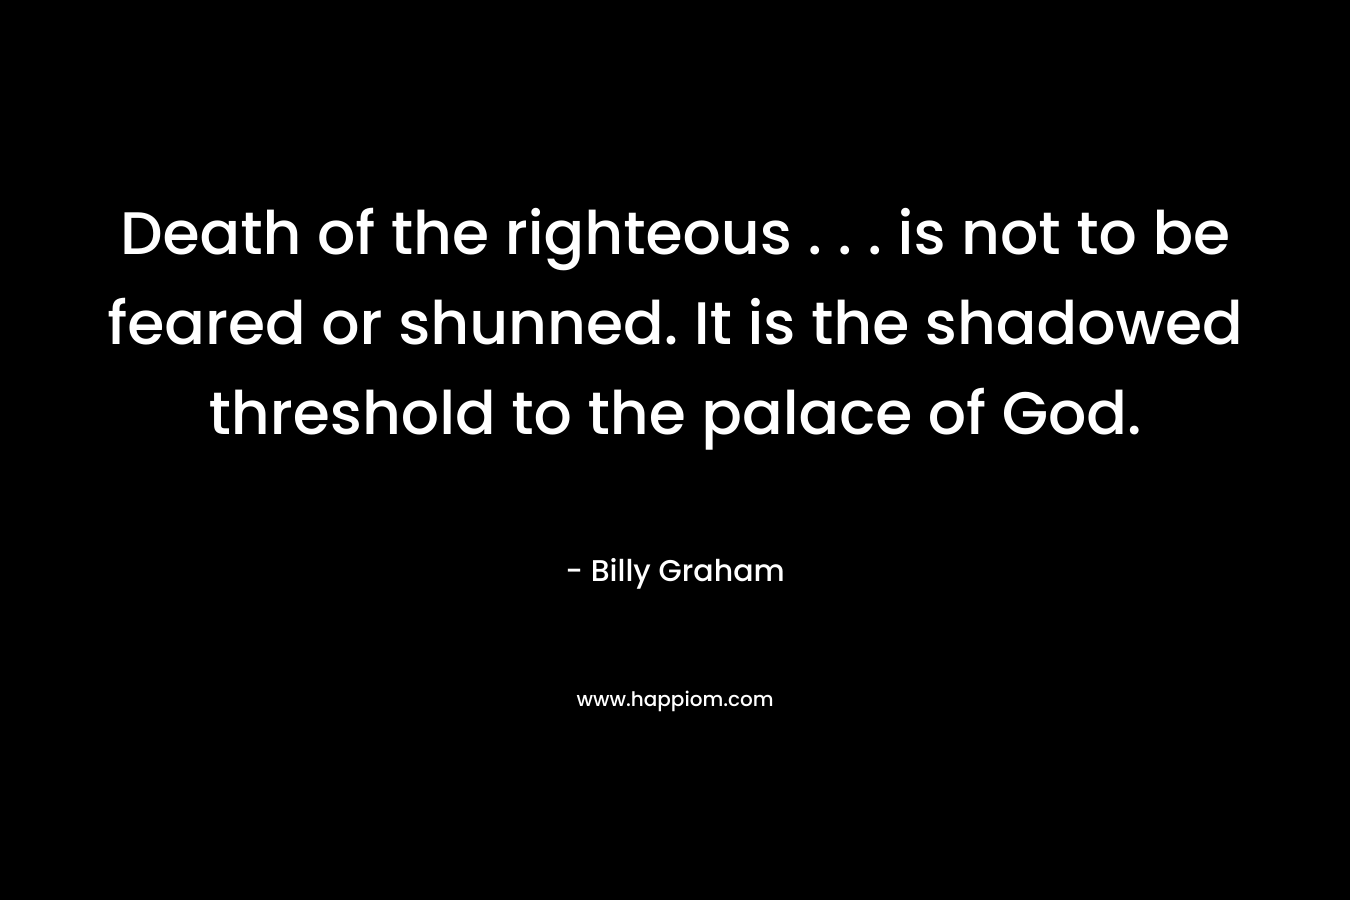 Death of the righteous . . . is not to be feared or shunned. It is the shadowed threshold to the palace of God. – Billy Graham